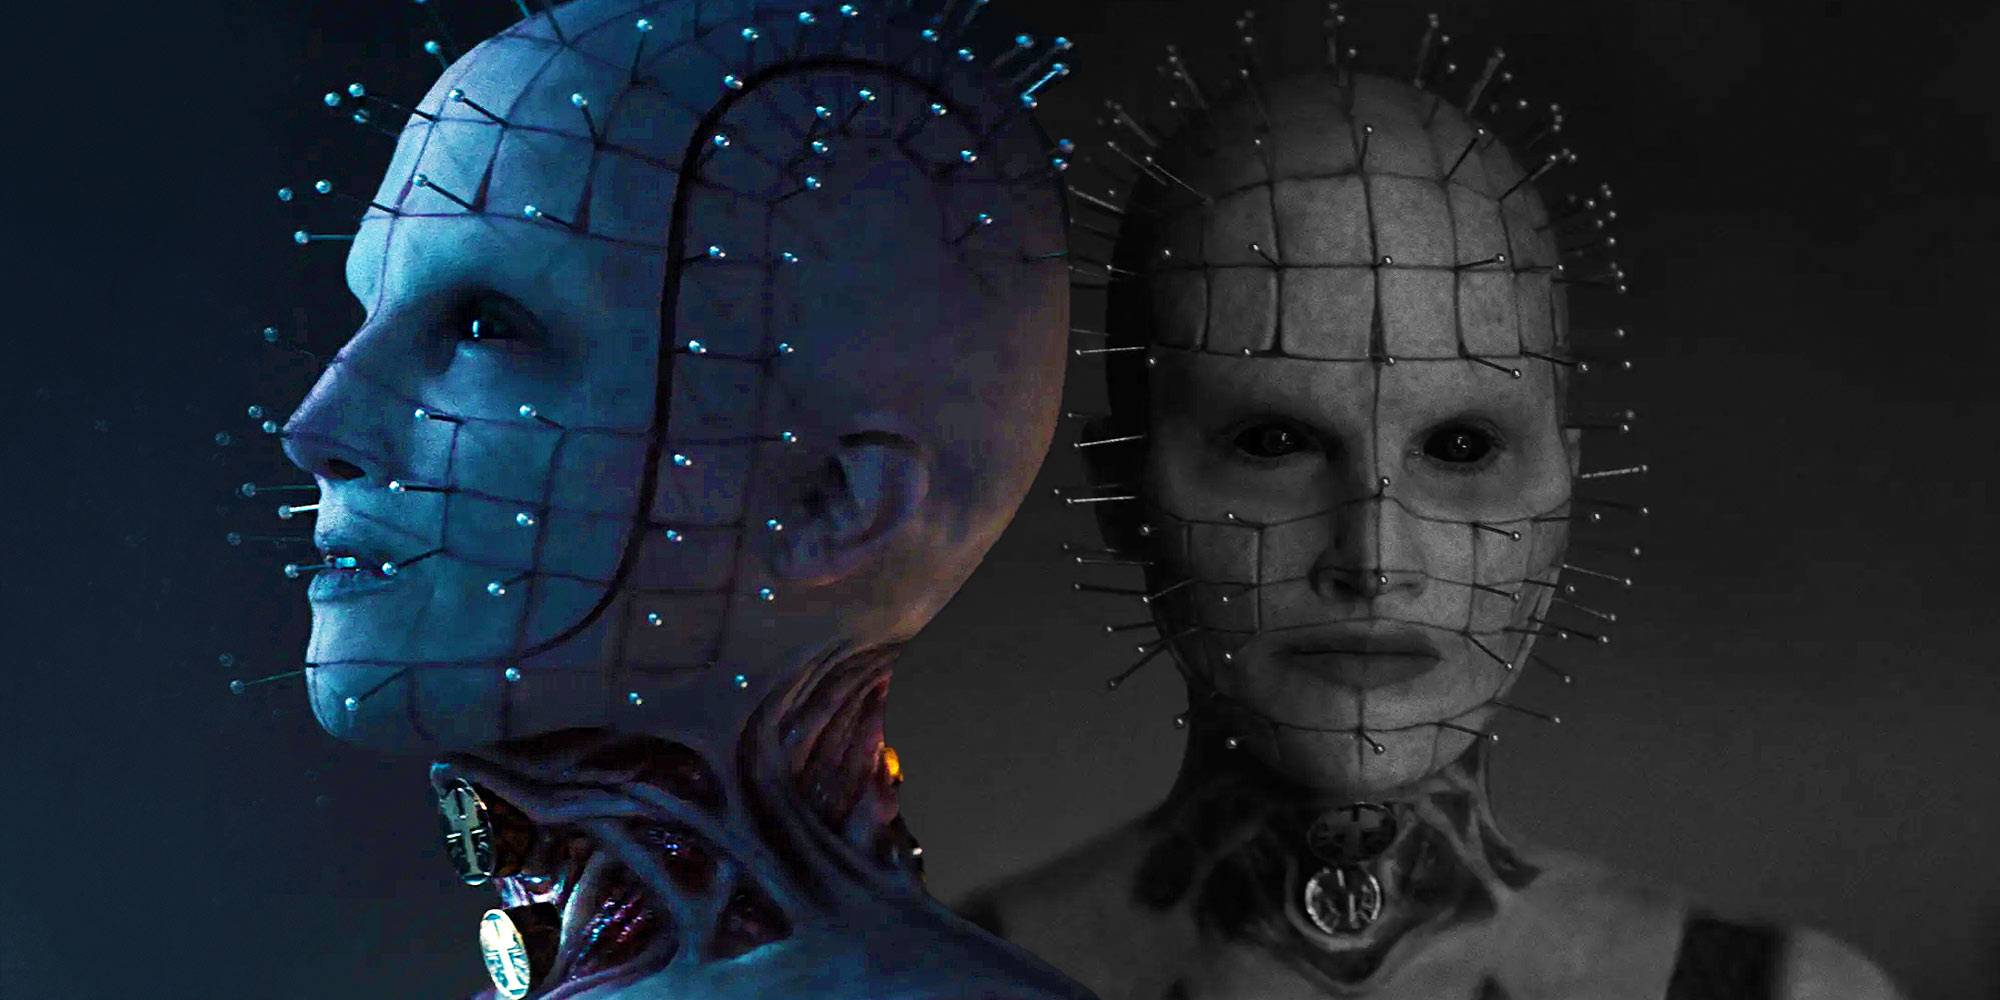 Get Lost in the Heat of Hellraiser's Latest Gallery